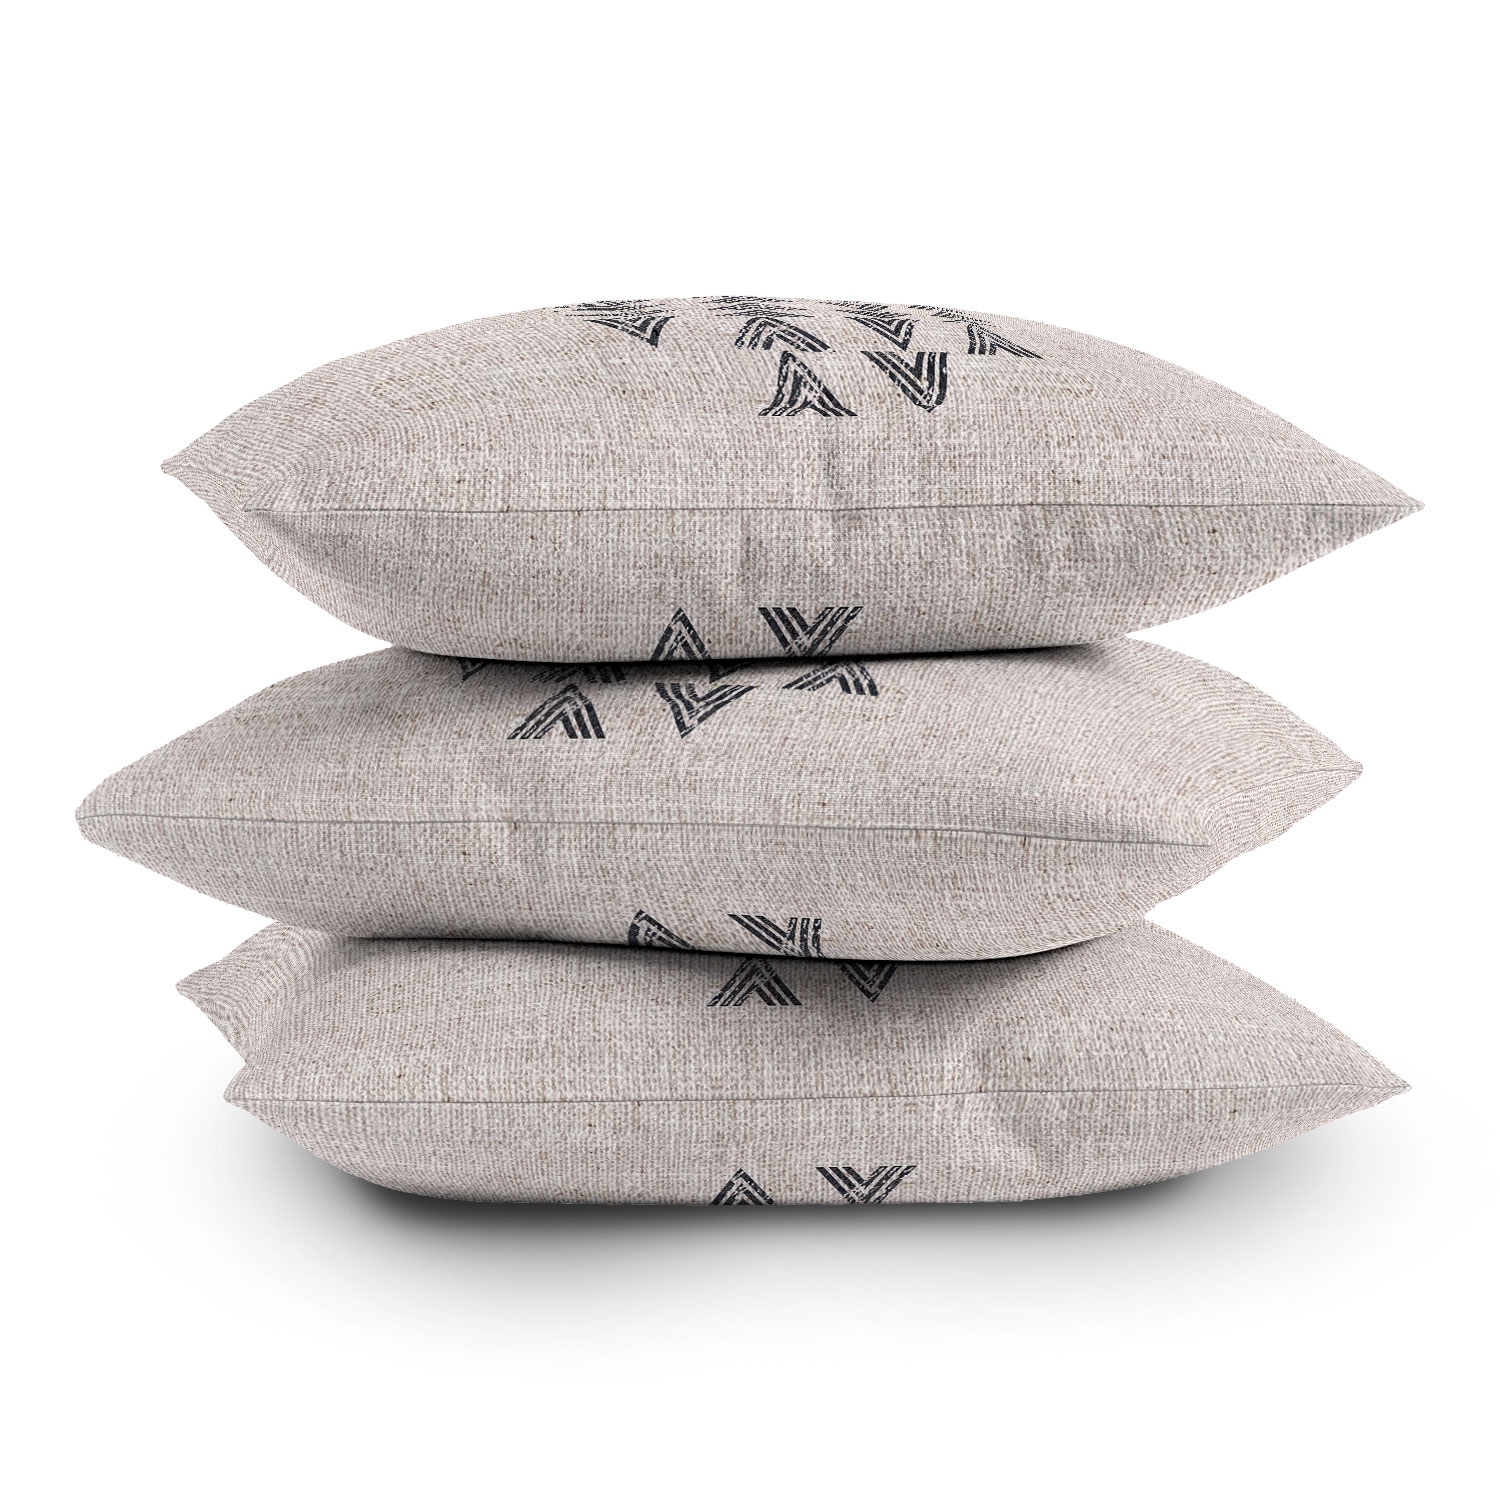 French Linen Tri Arrow by Holli Zollinger - Outdoor Throw Pillow 18" x 18" - Image 3